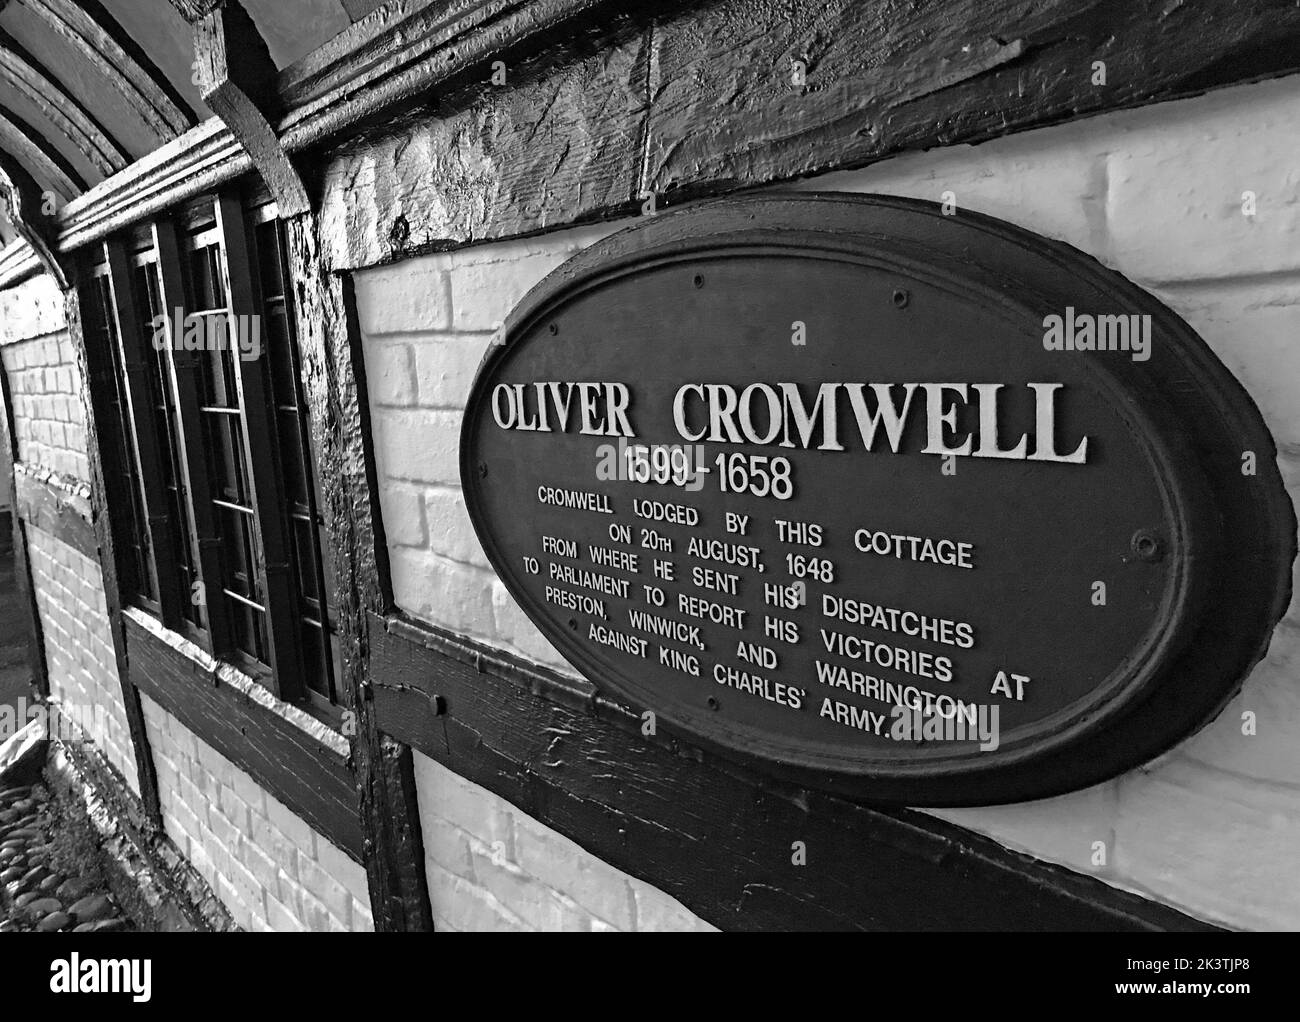 Oliver Cromwell cottage 1599-1658, lodged by this cottage 20th August 1648, following victories at Preston , Winwick & Warrington Stock Photo